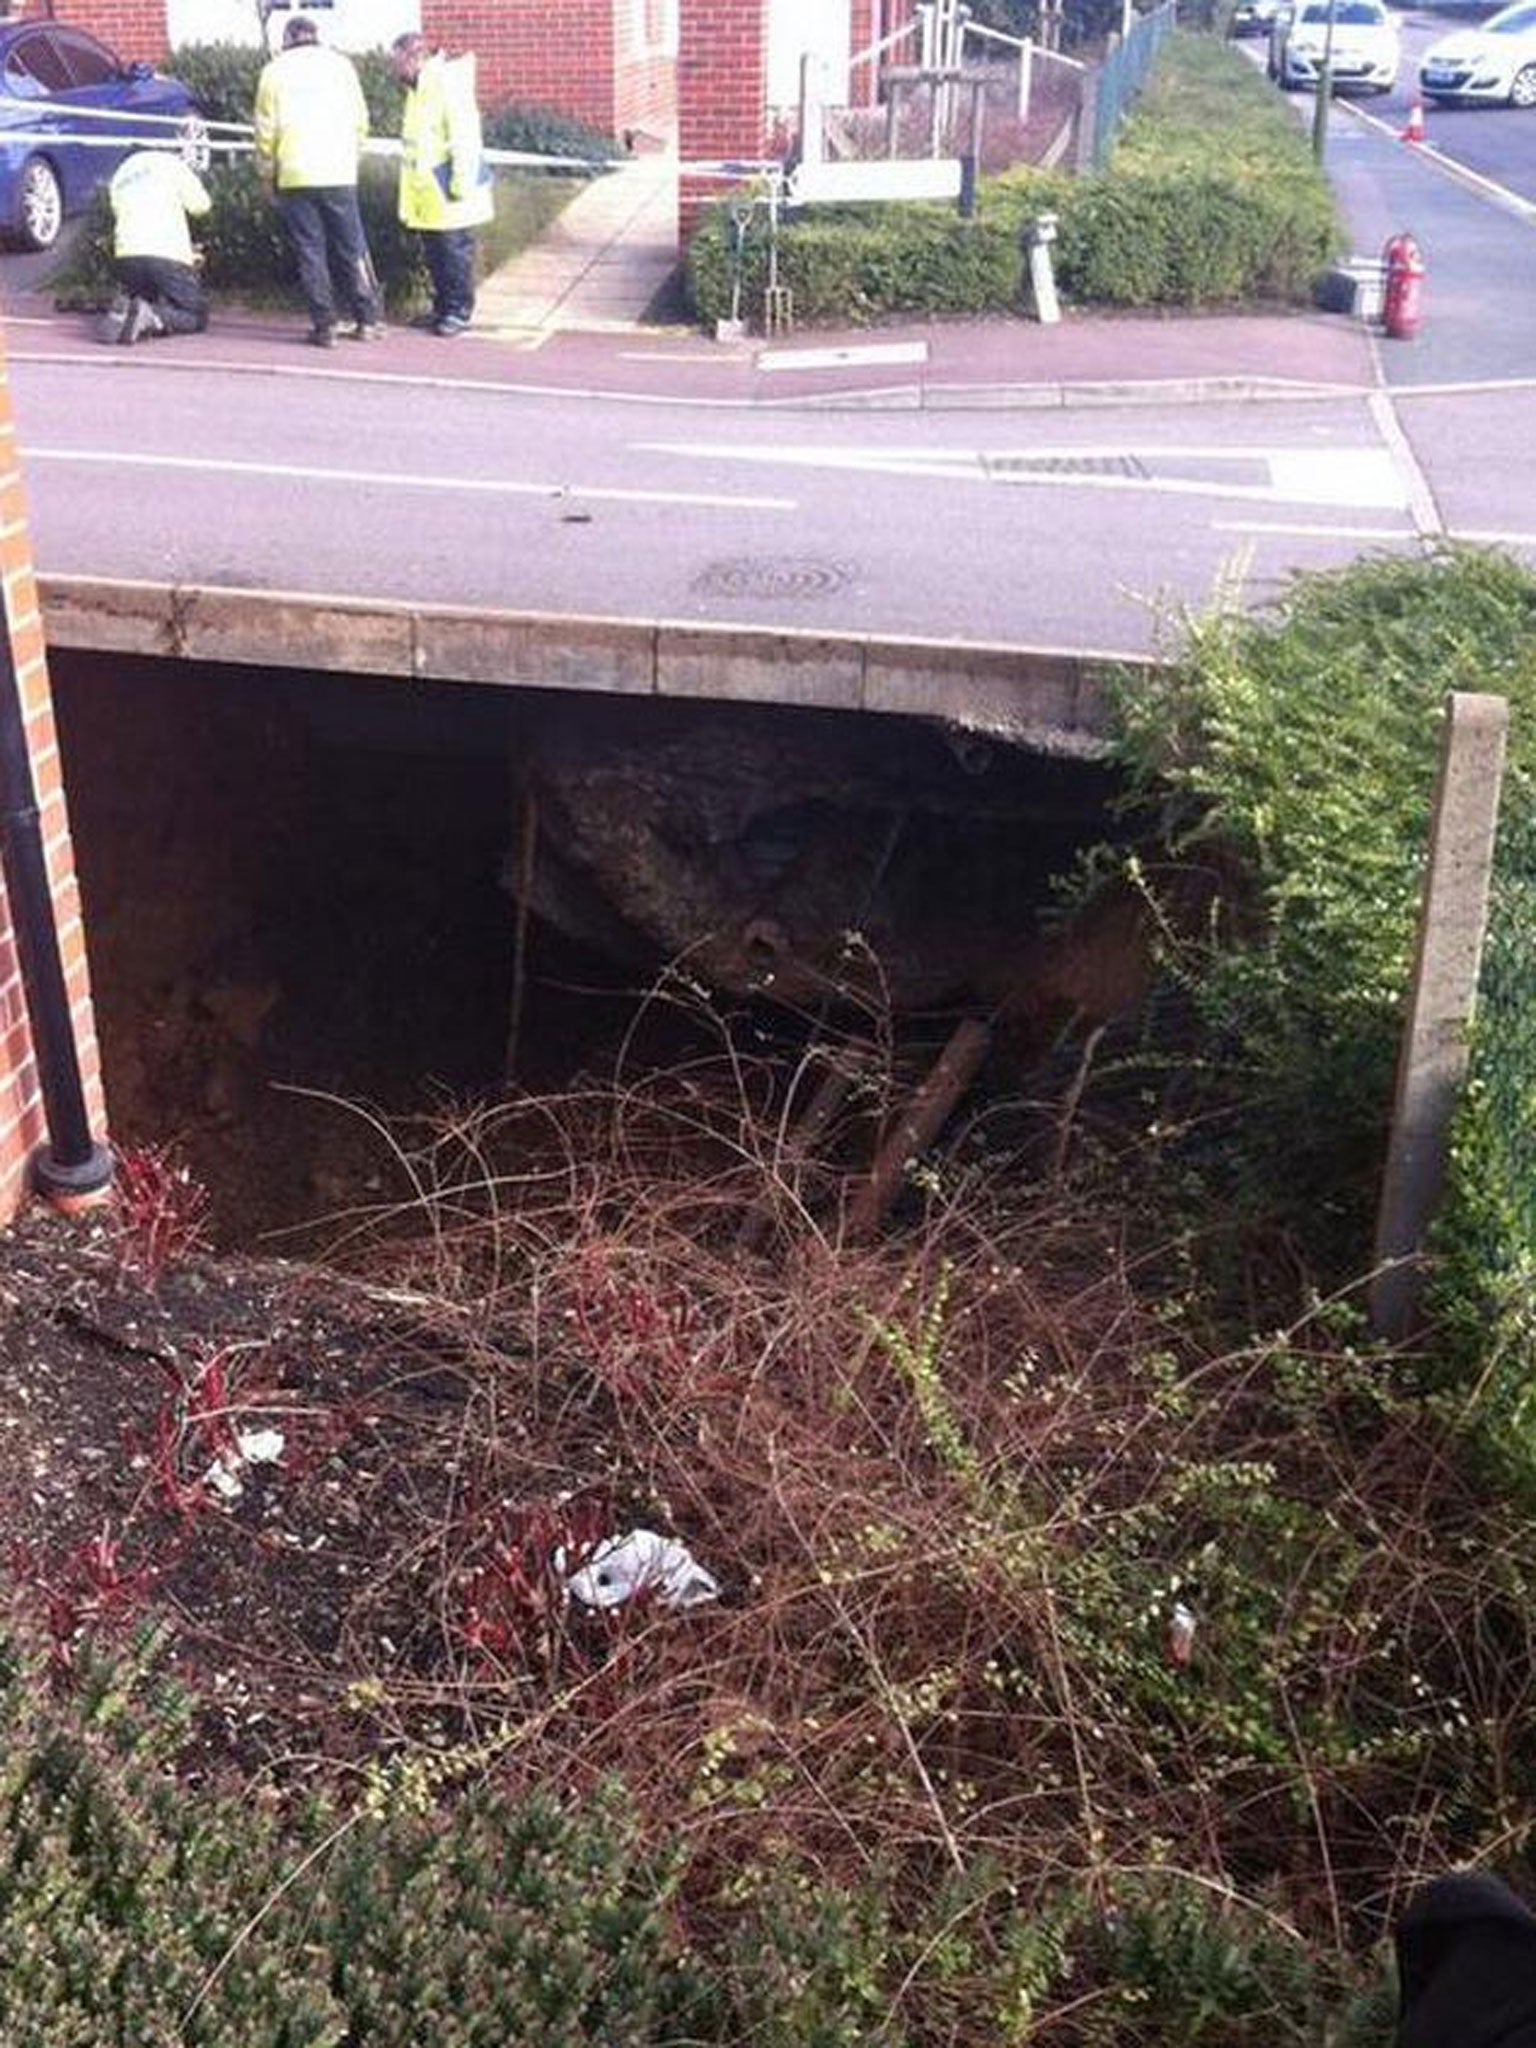 This picture of the sinkhole in Hemel Hempstead was taken by a Hertfordshire Fire and Rescue firefighter.